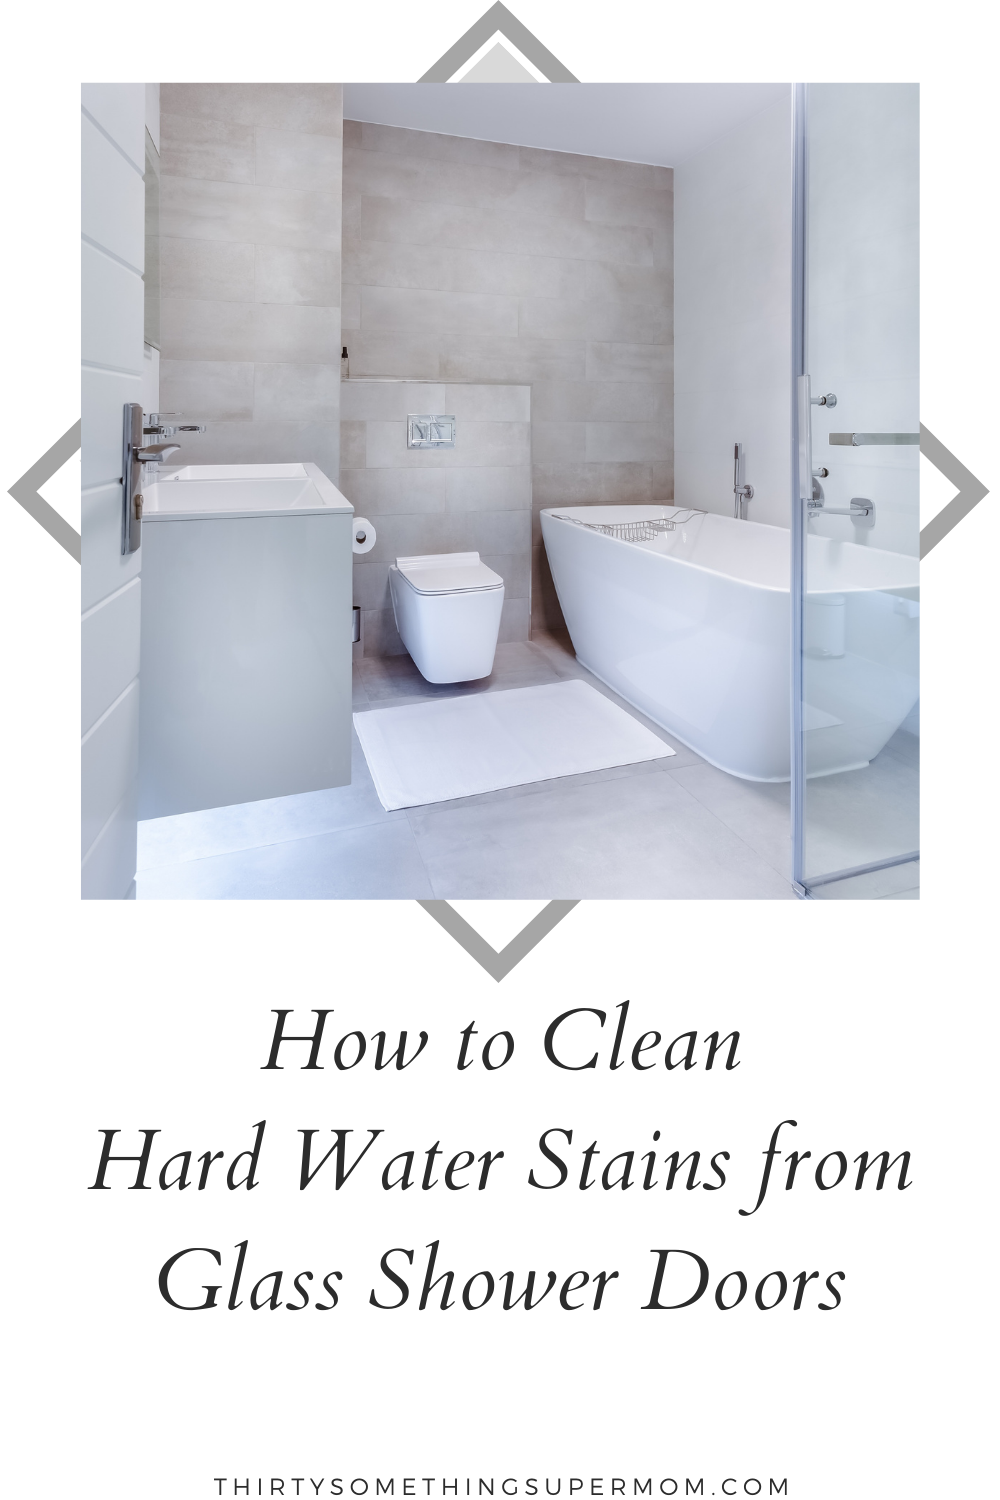 Hard Water Stains from Glass Shower Doors